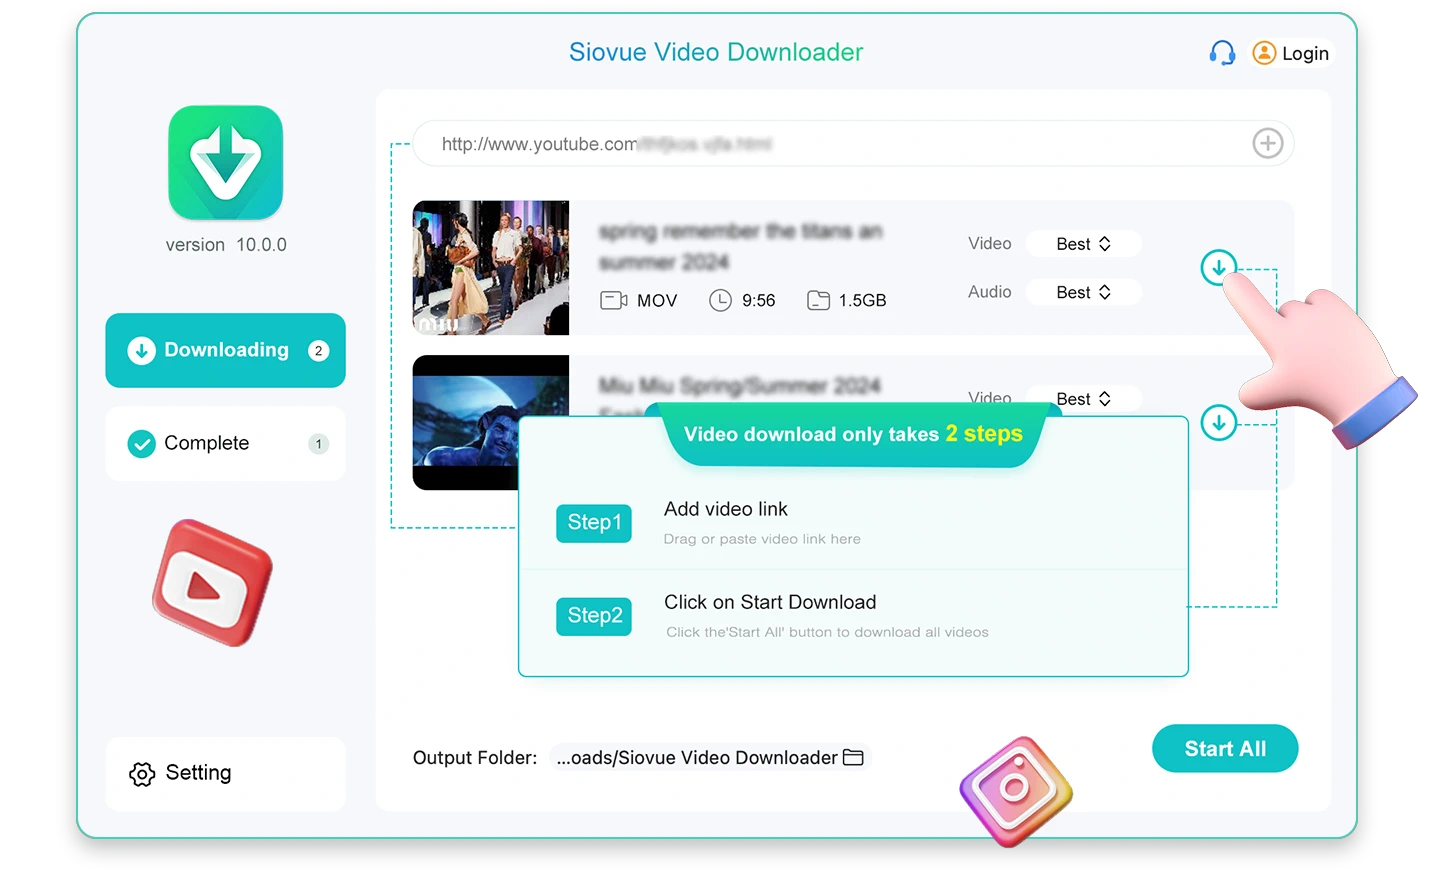 Siovue Video Downloader application